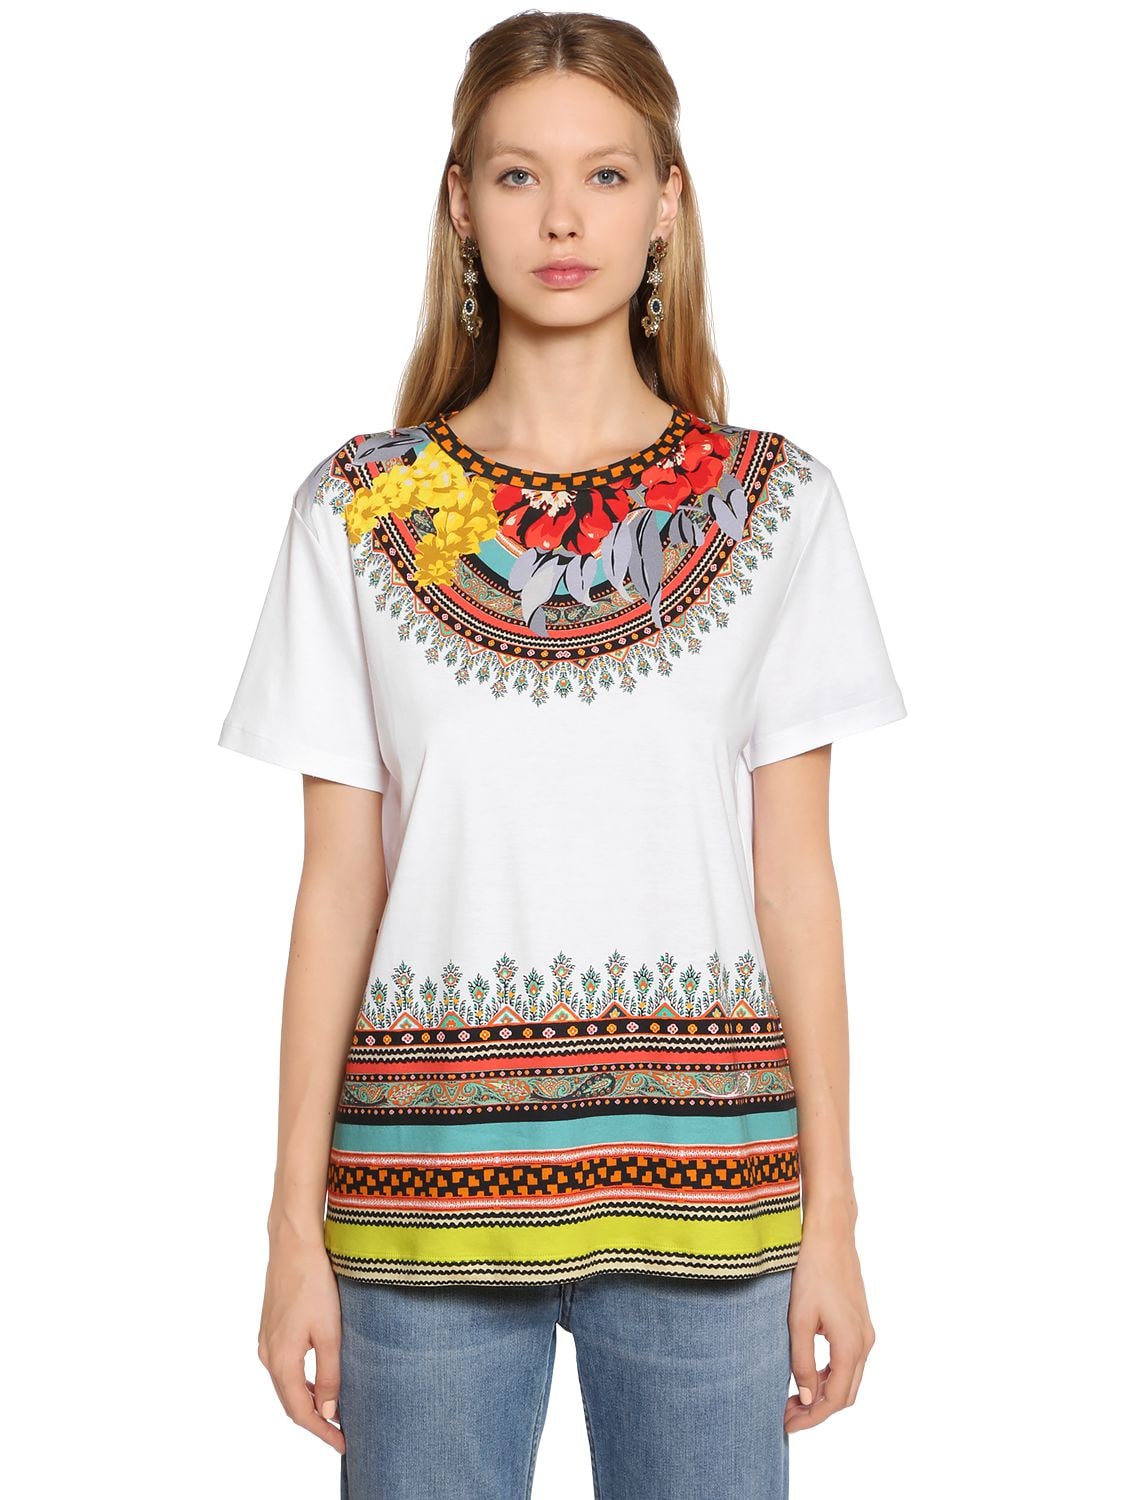 ETRO FLORAL PRINTED JERSEY T-SHIRT,67ID4M013-OTKW0